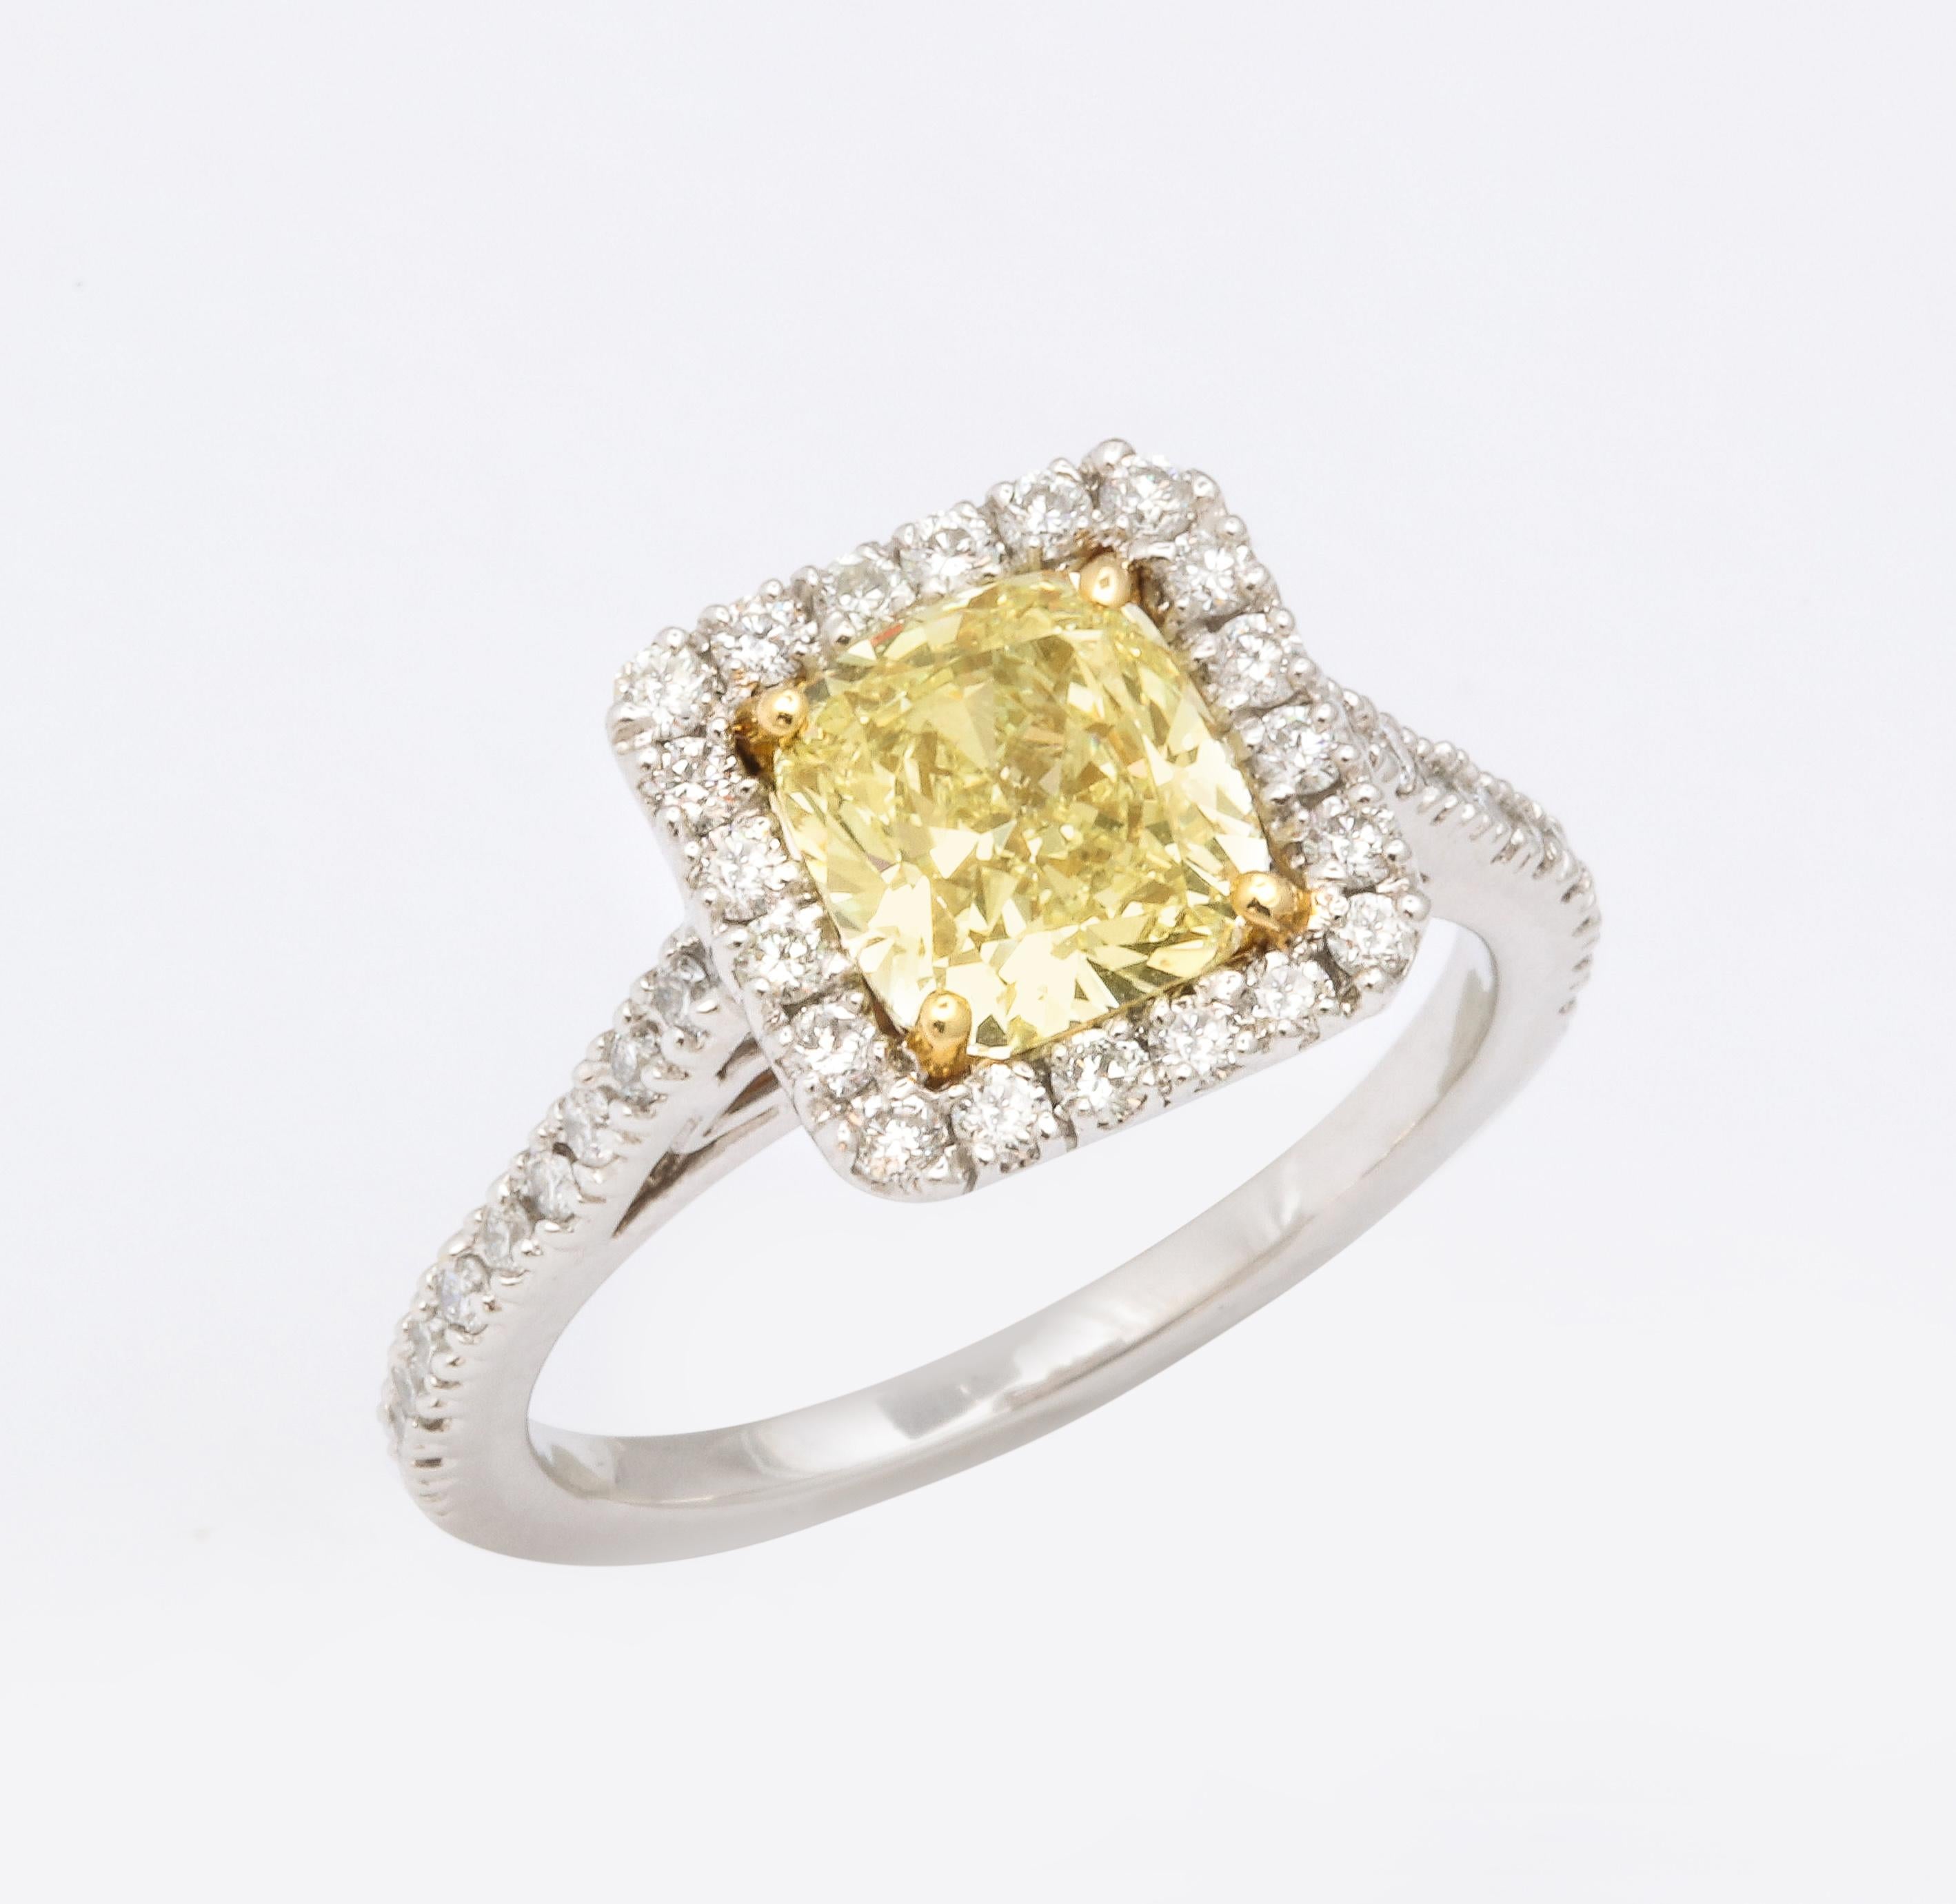 GIA Certified 1.71 Carat Yellow Diamond Engagement Ring For Sale 2